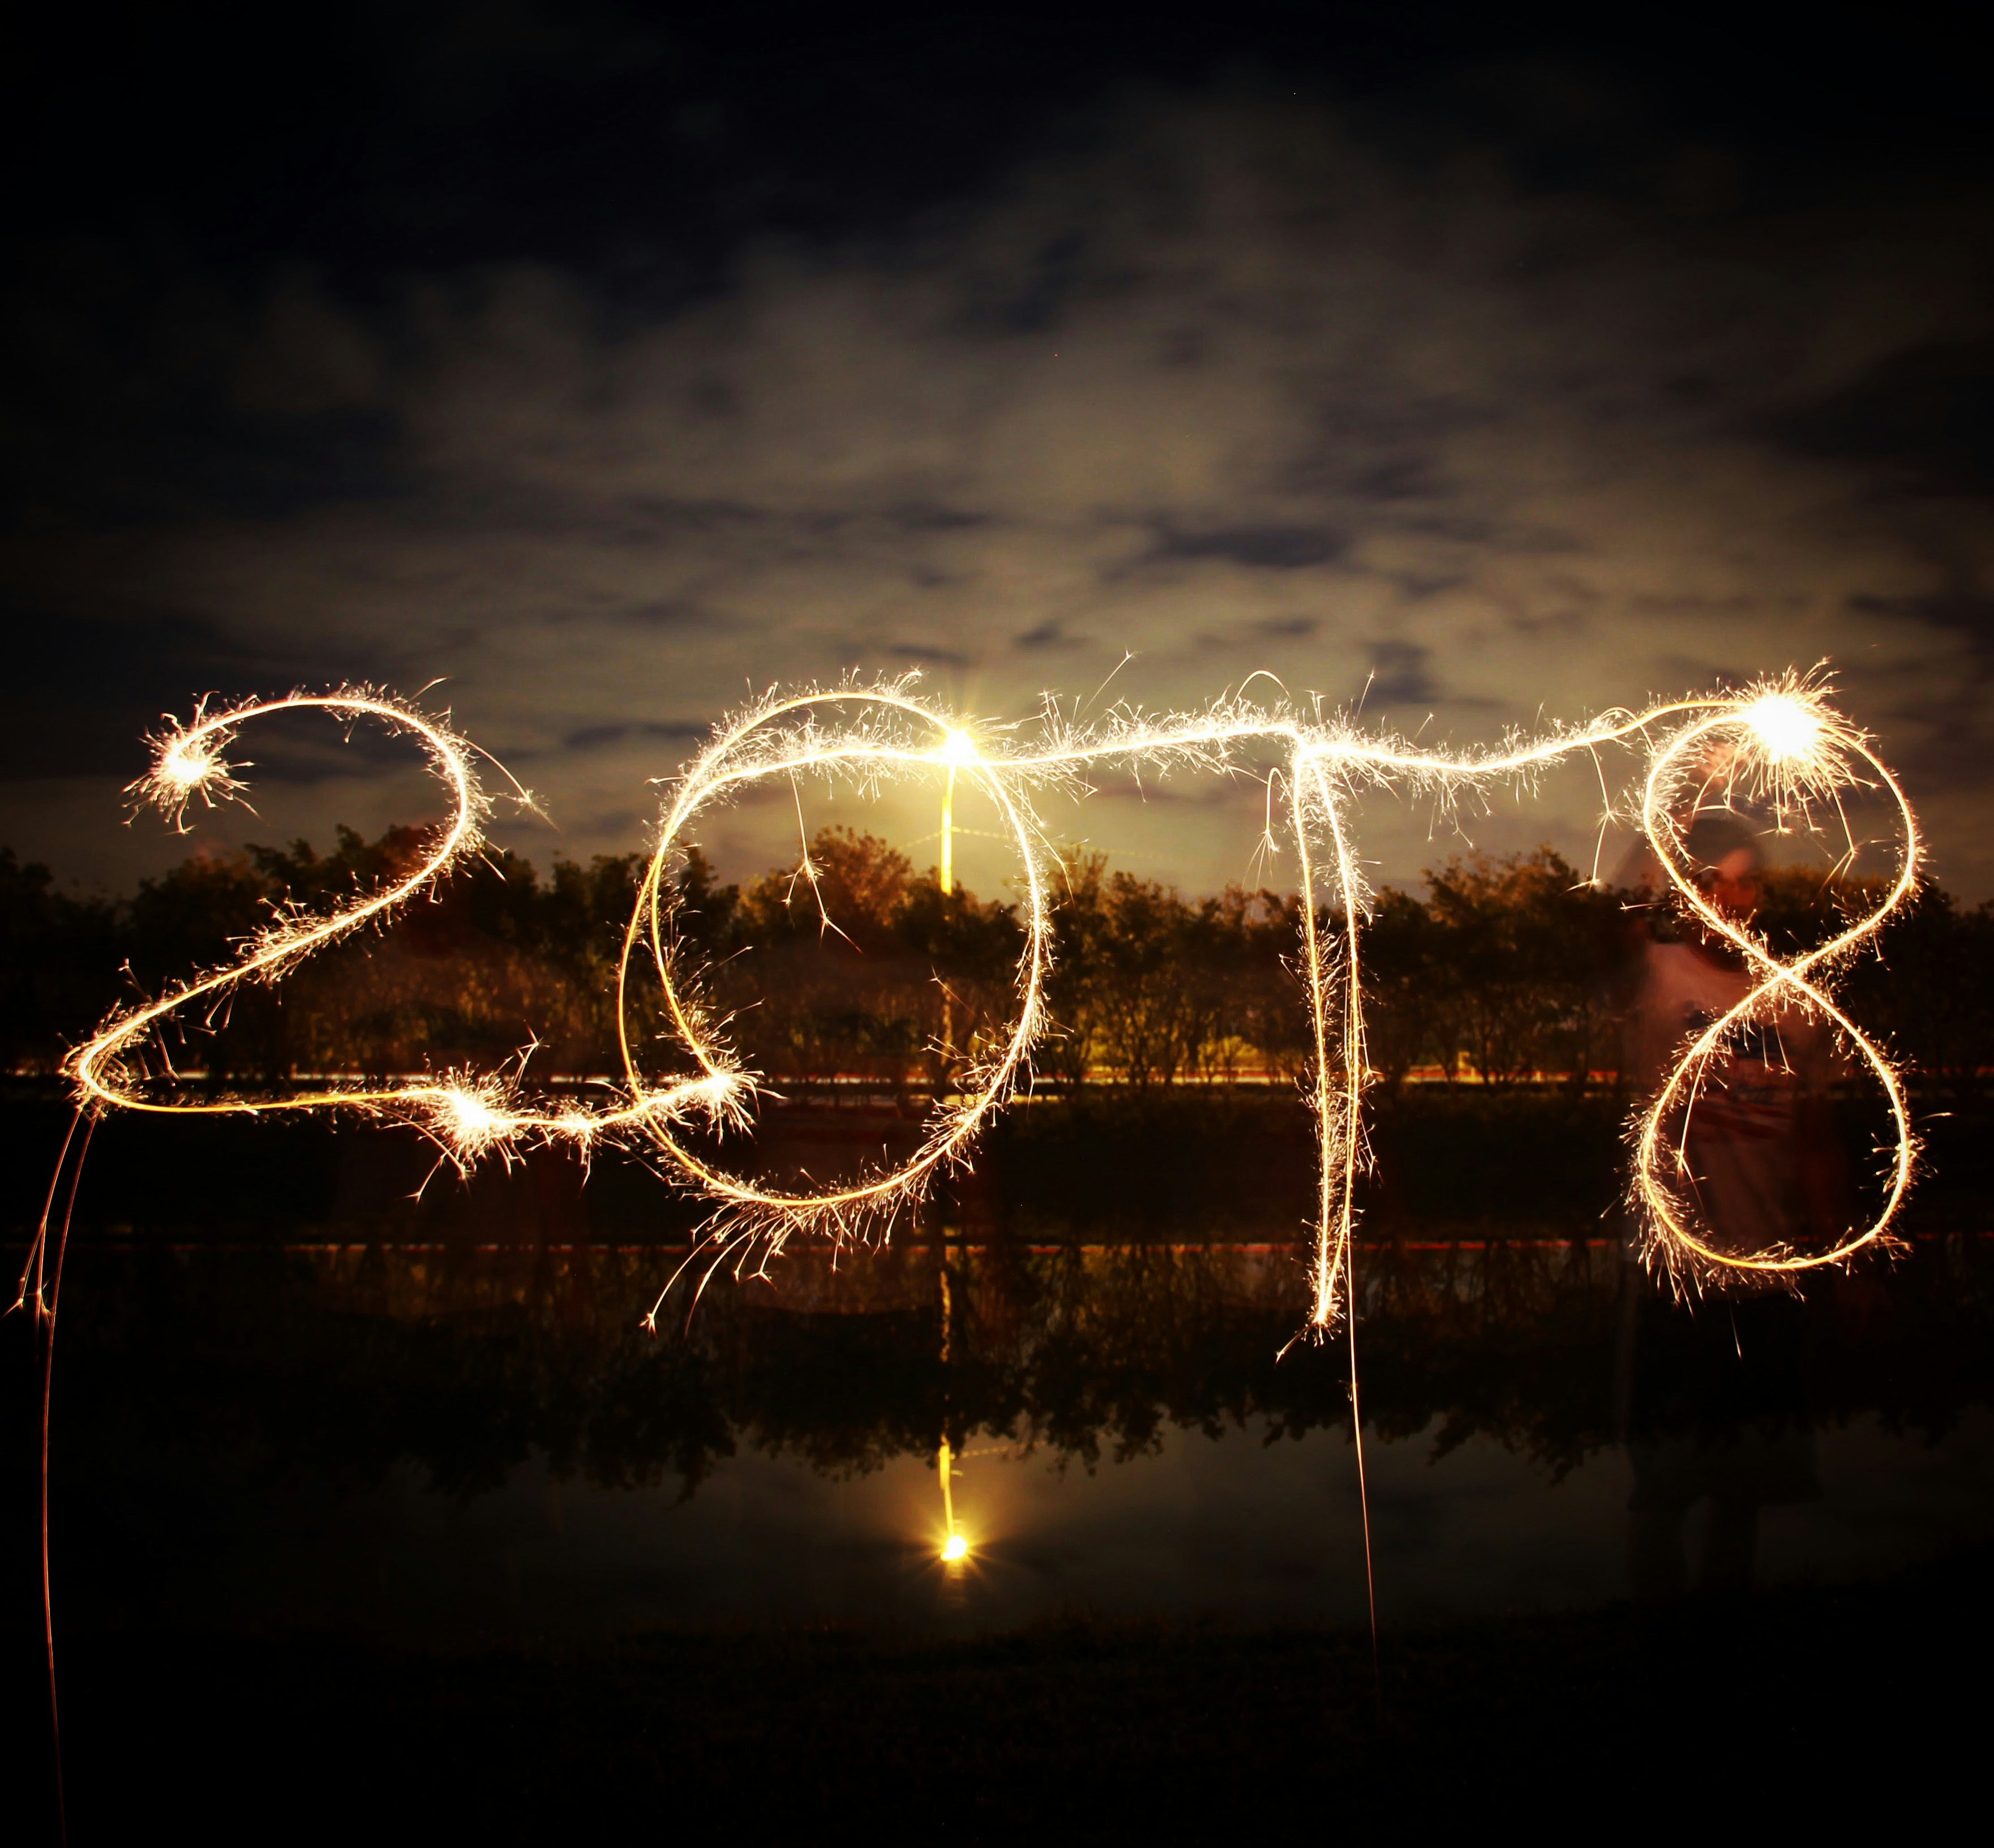 This was a remake of the same thing I did for the new year in 2017. My friend graduates this year so he wanted to be the one writing out 2018 so he can use as a graduation picture. I enjoy long exposures and sparklers so combining them only felt natural.